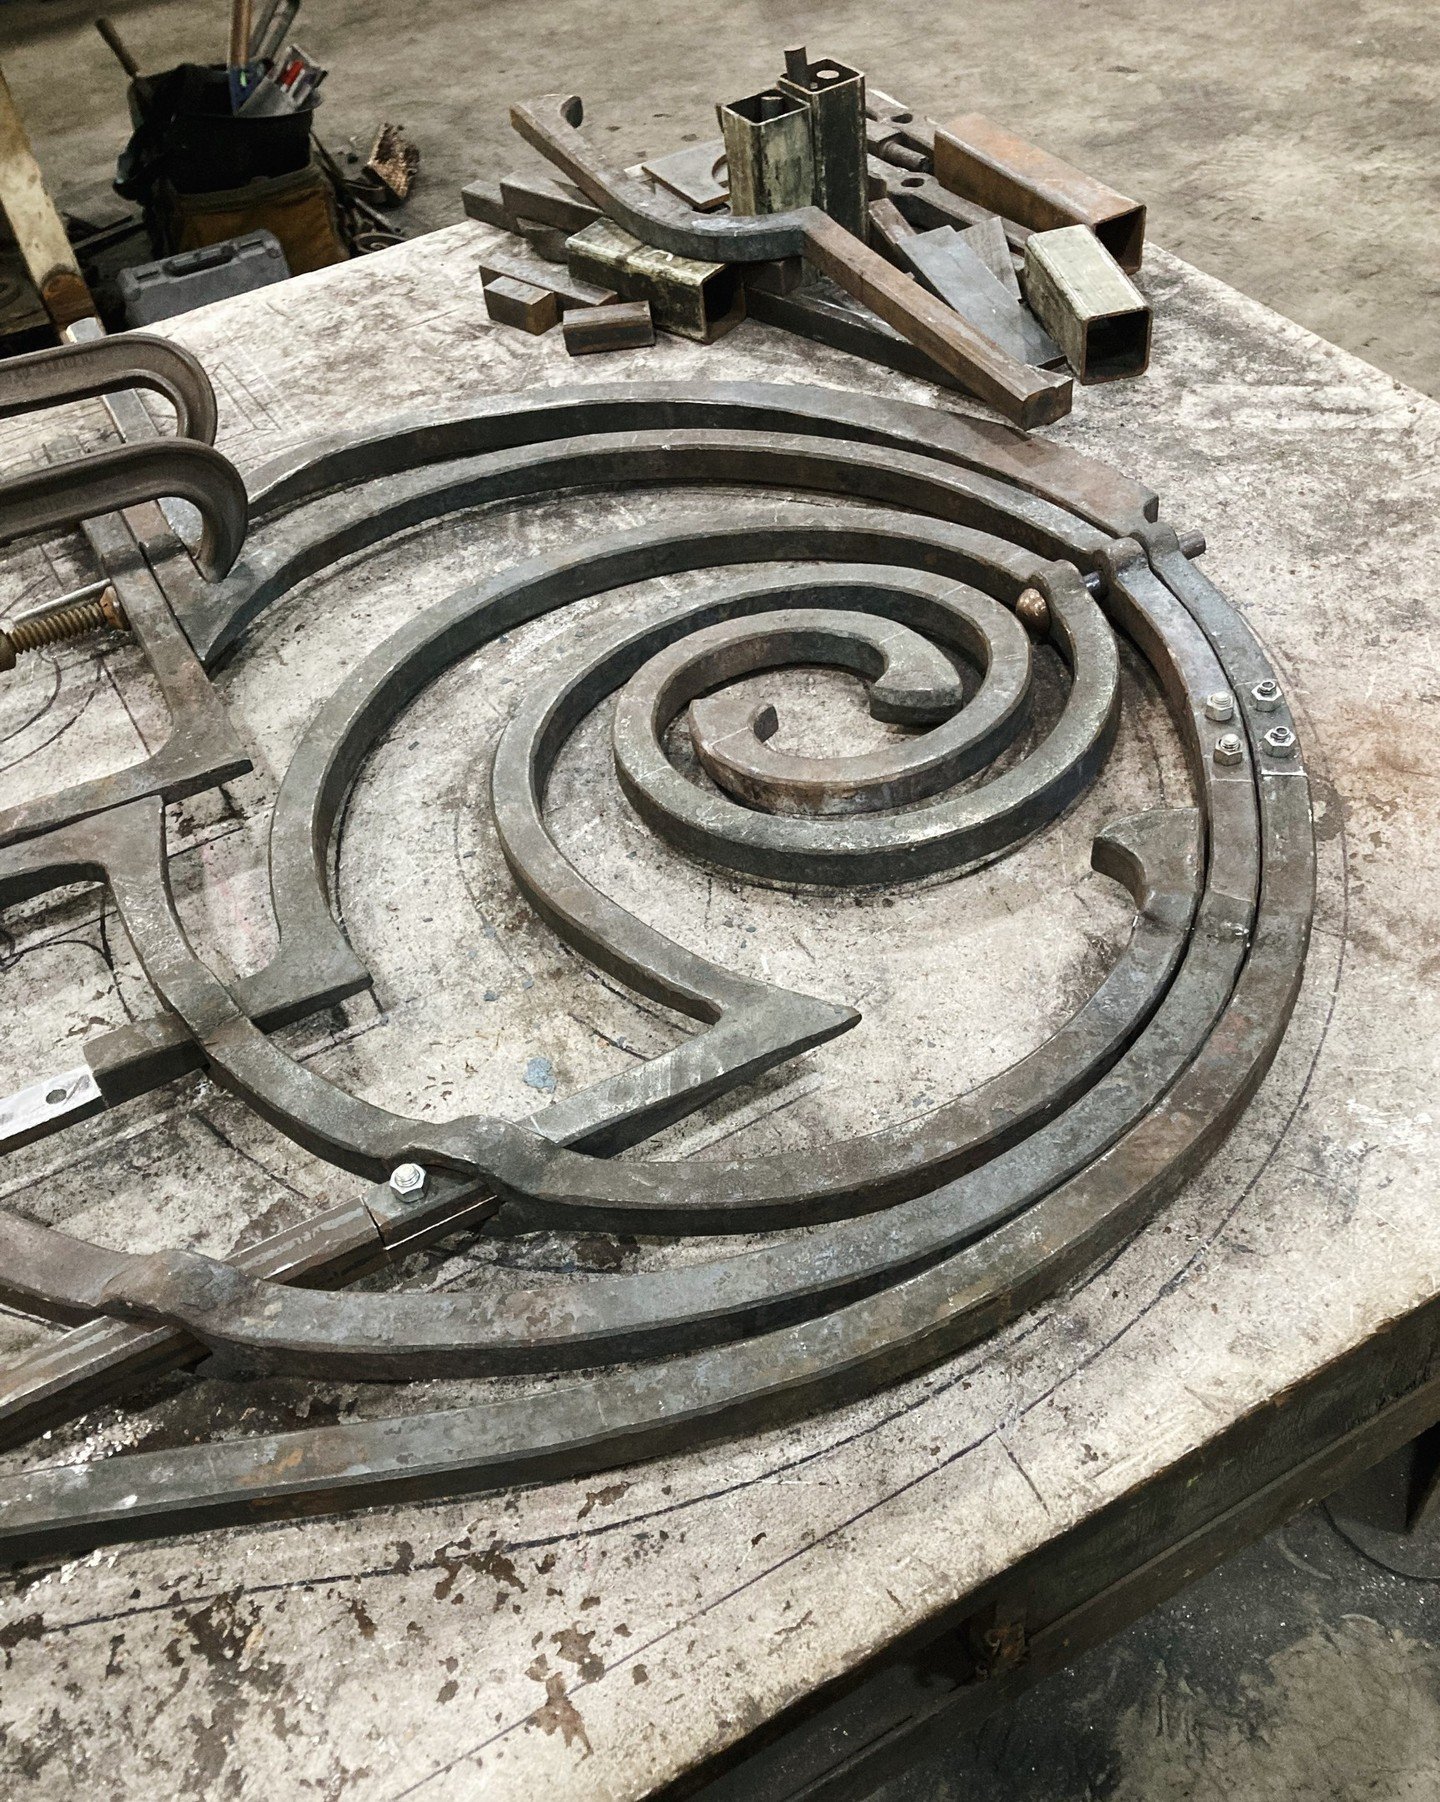 Capstone progress report from blacksmithing senior @paulreilly_ironcraft whose work on the Omniscience sculpture at the Gibbes Museum was featured here earlier this year. Paul is crafting a hand forged 3' x 7' door with a Roman arch inspired by Botta